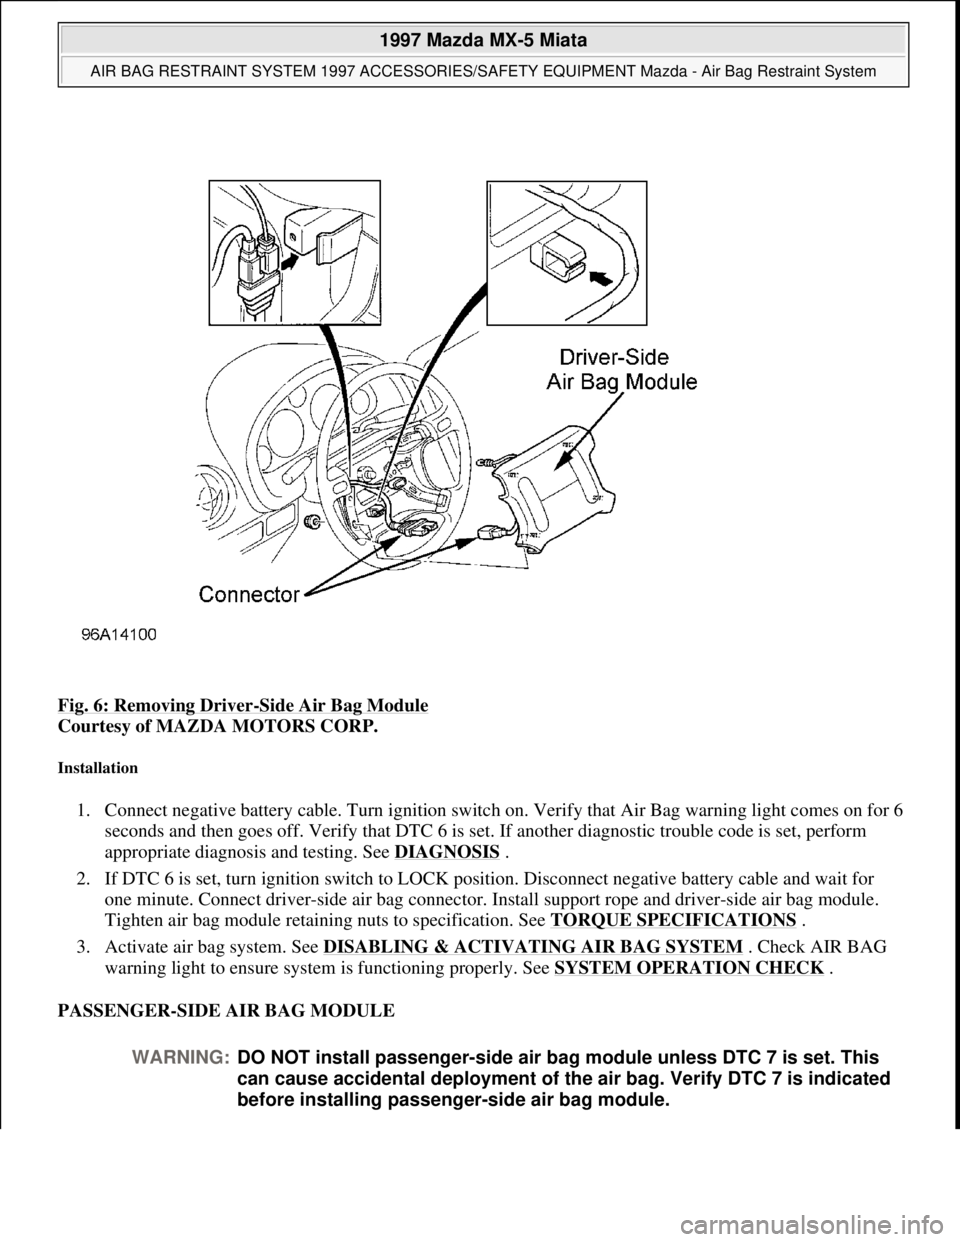 MAZDA MX-5 1997  Factory Repair Manual Fig. 6: Removing Driver-Side Air Bag Module 
Courtesy of MAZDA MOTORS CORP.  
Installation 
1. Connect negative battery cable. Turn ignition switch on. Verify that Air Bag warning light comes on for 6